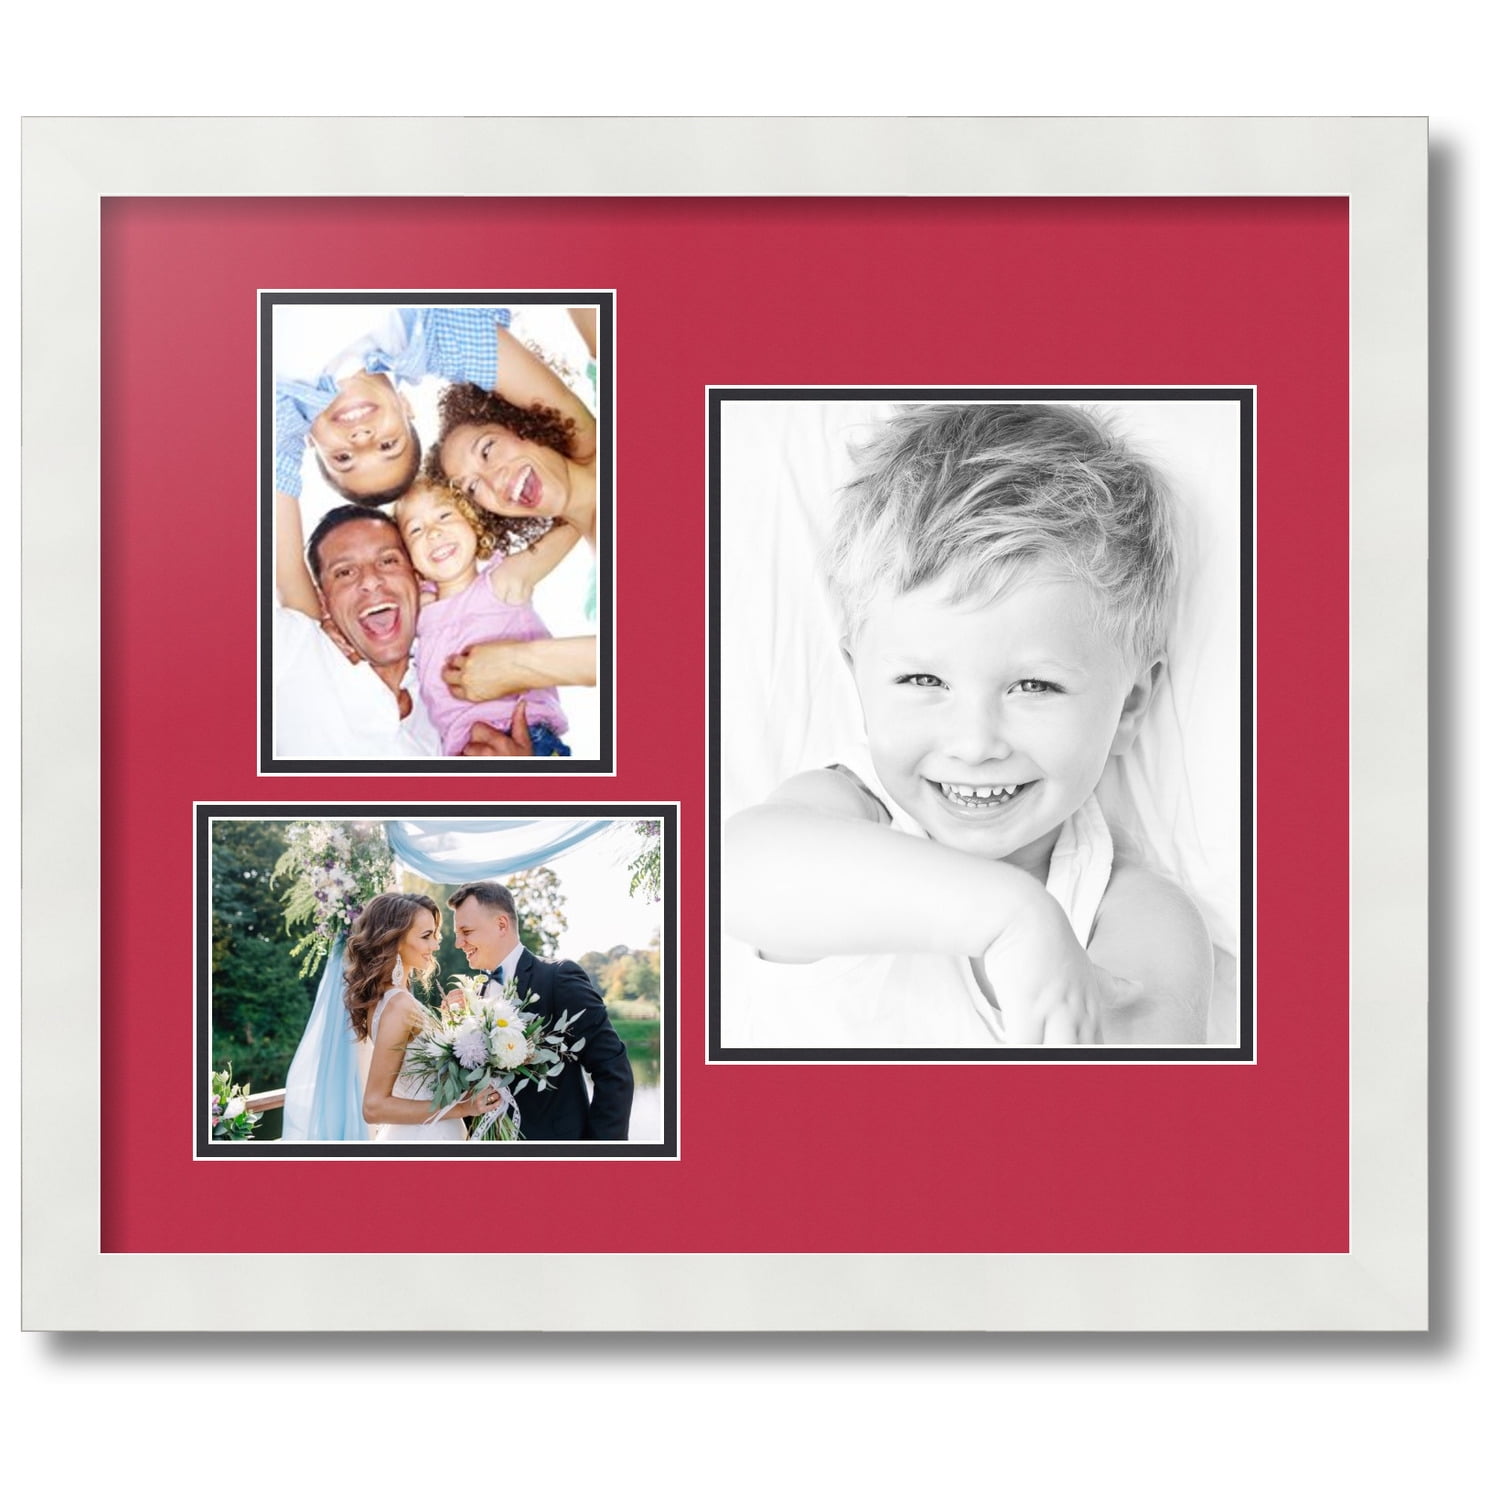 ArtToFrames Collage Photo Picture Frame with 4 - 4x6 inch Openings, Framed  in Black with Over 62 Mat Color Options and Regular Glass (CSM-3926-178)